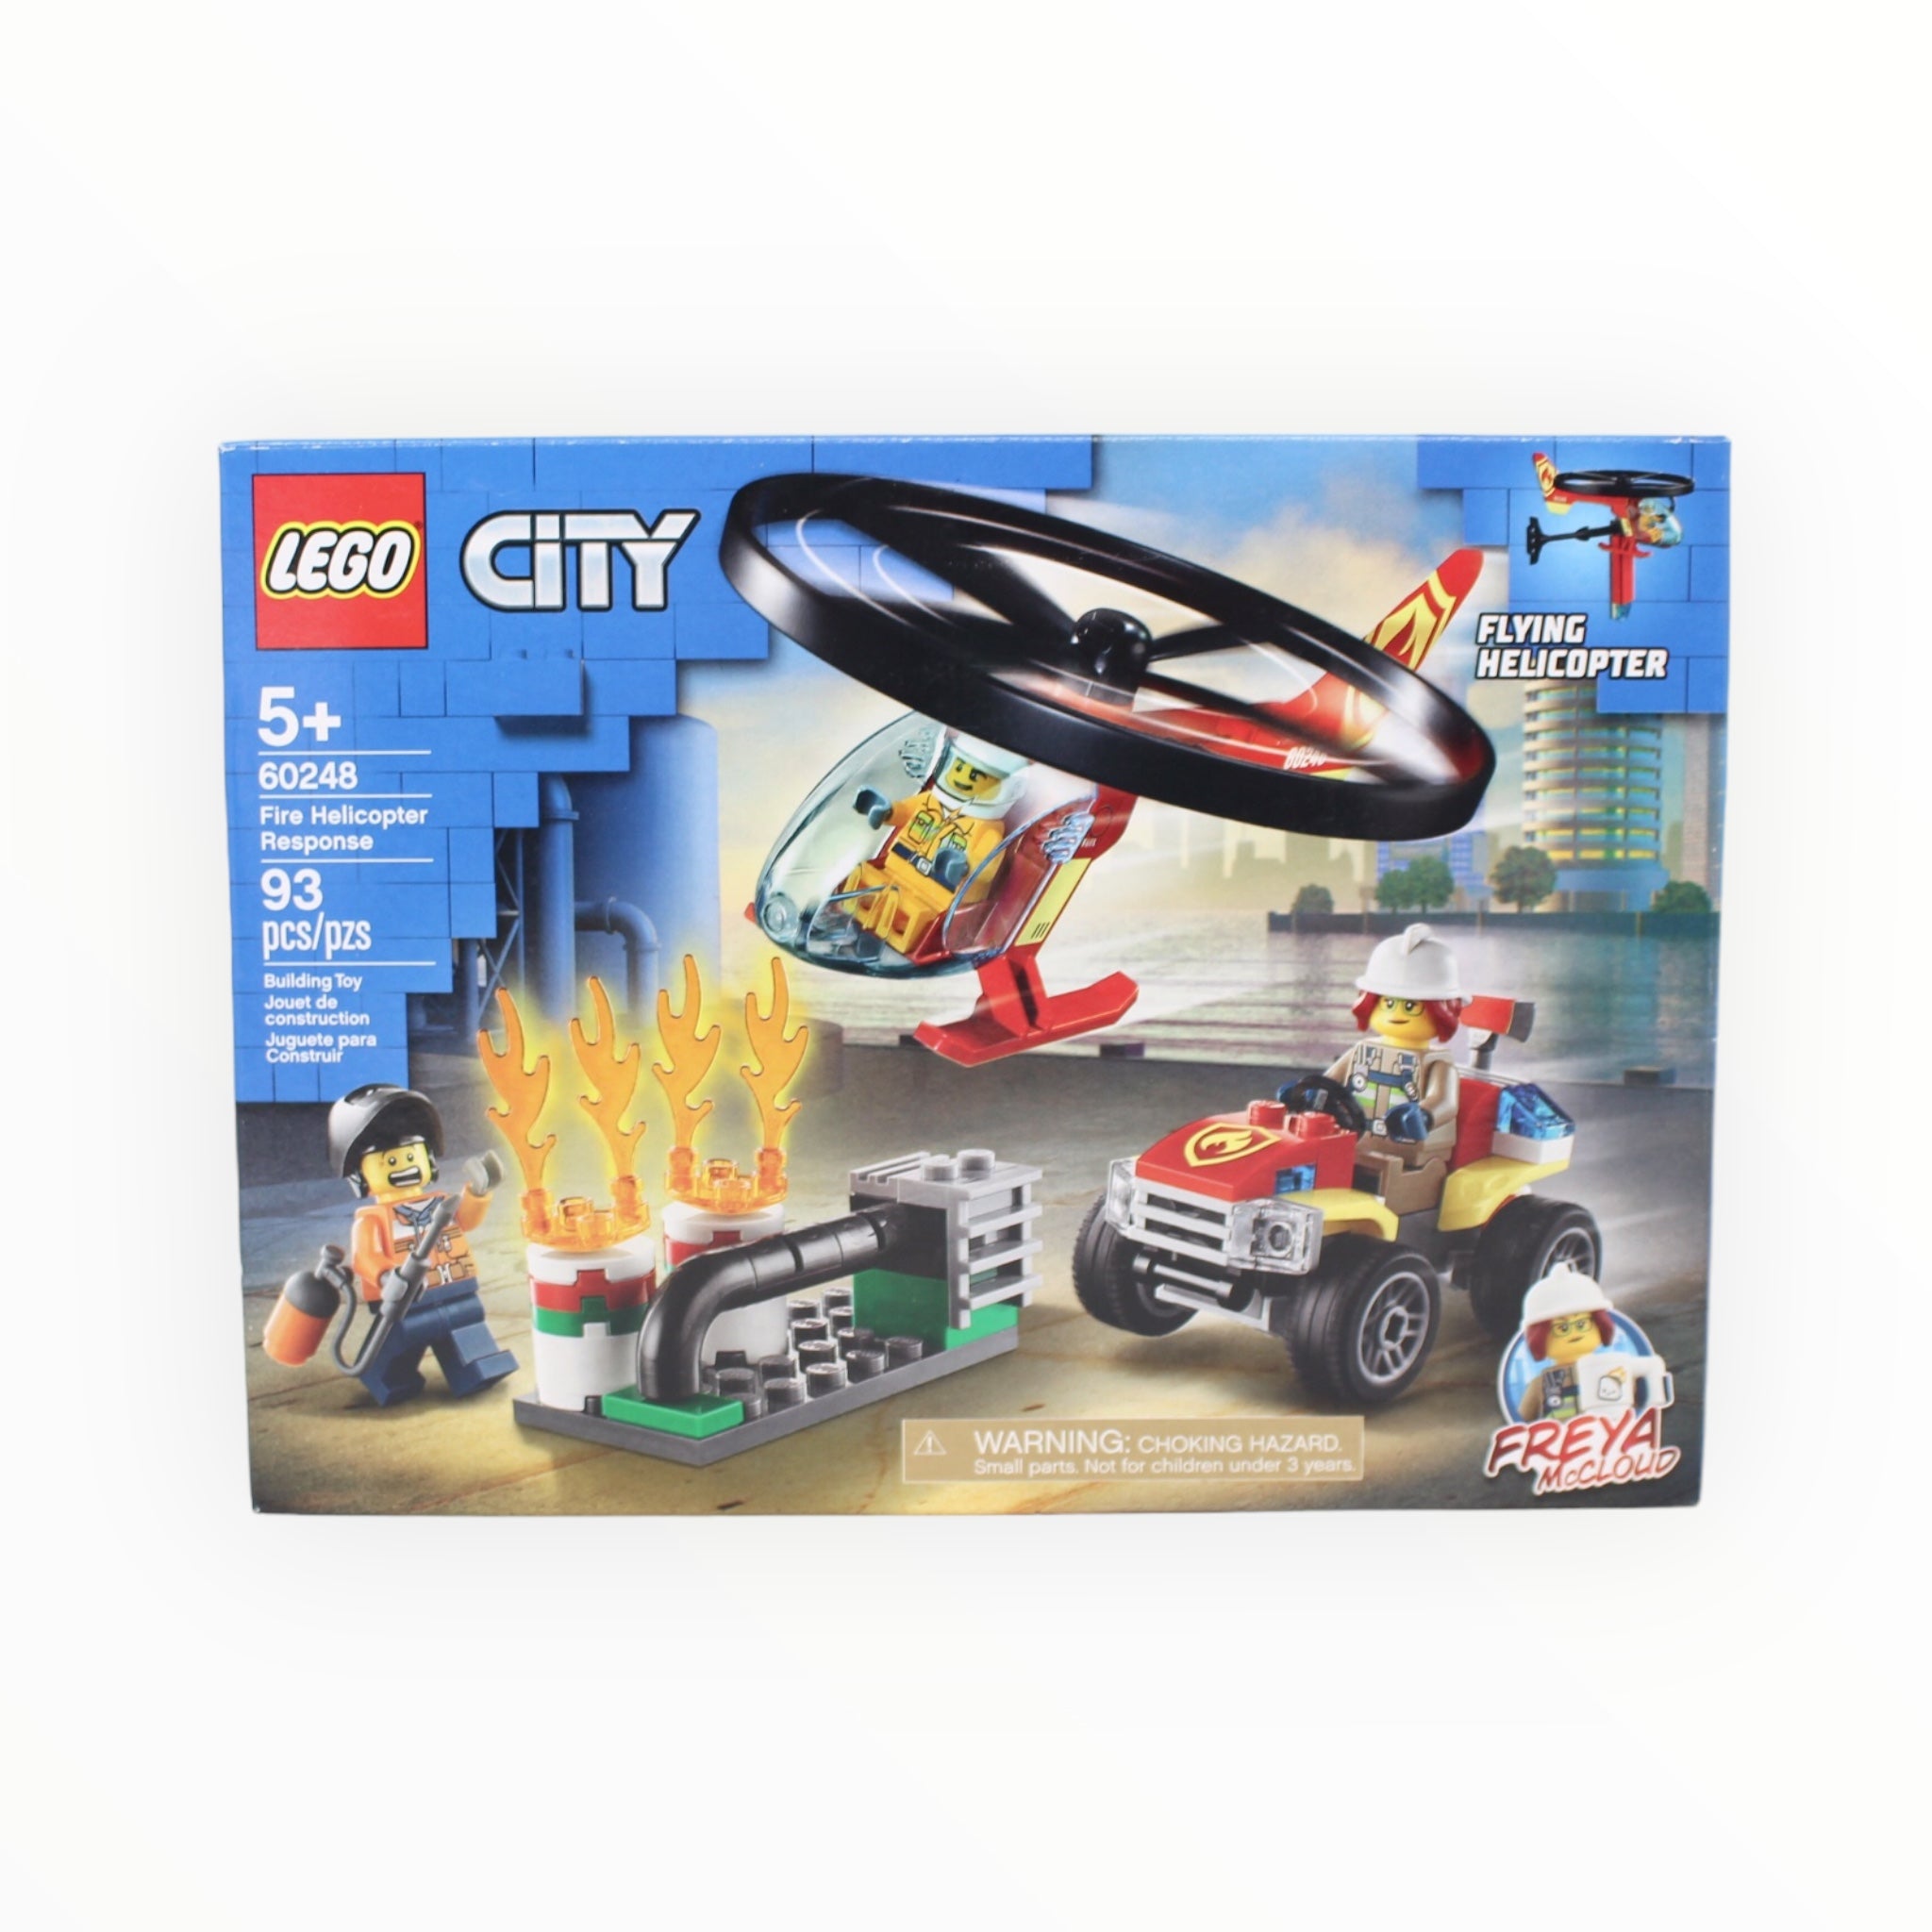 Retired Set 60248 City Fire Helicopter Response